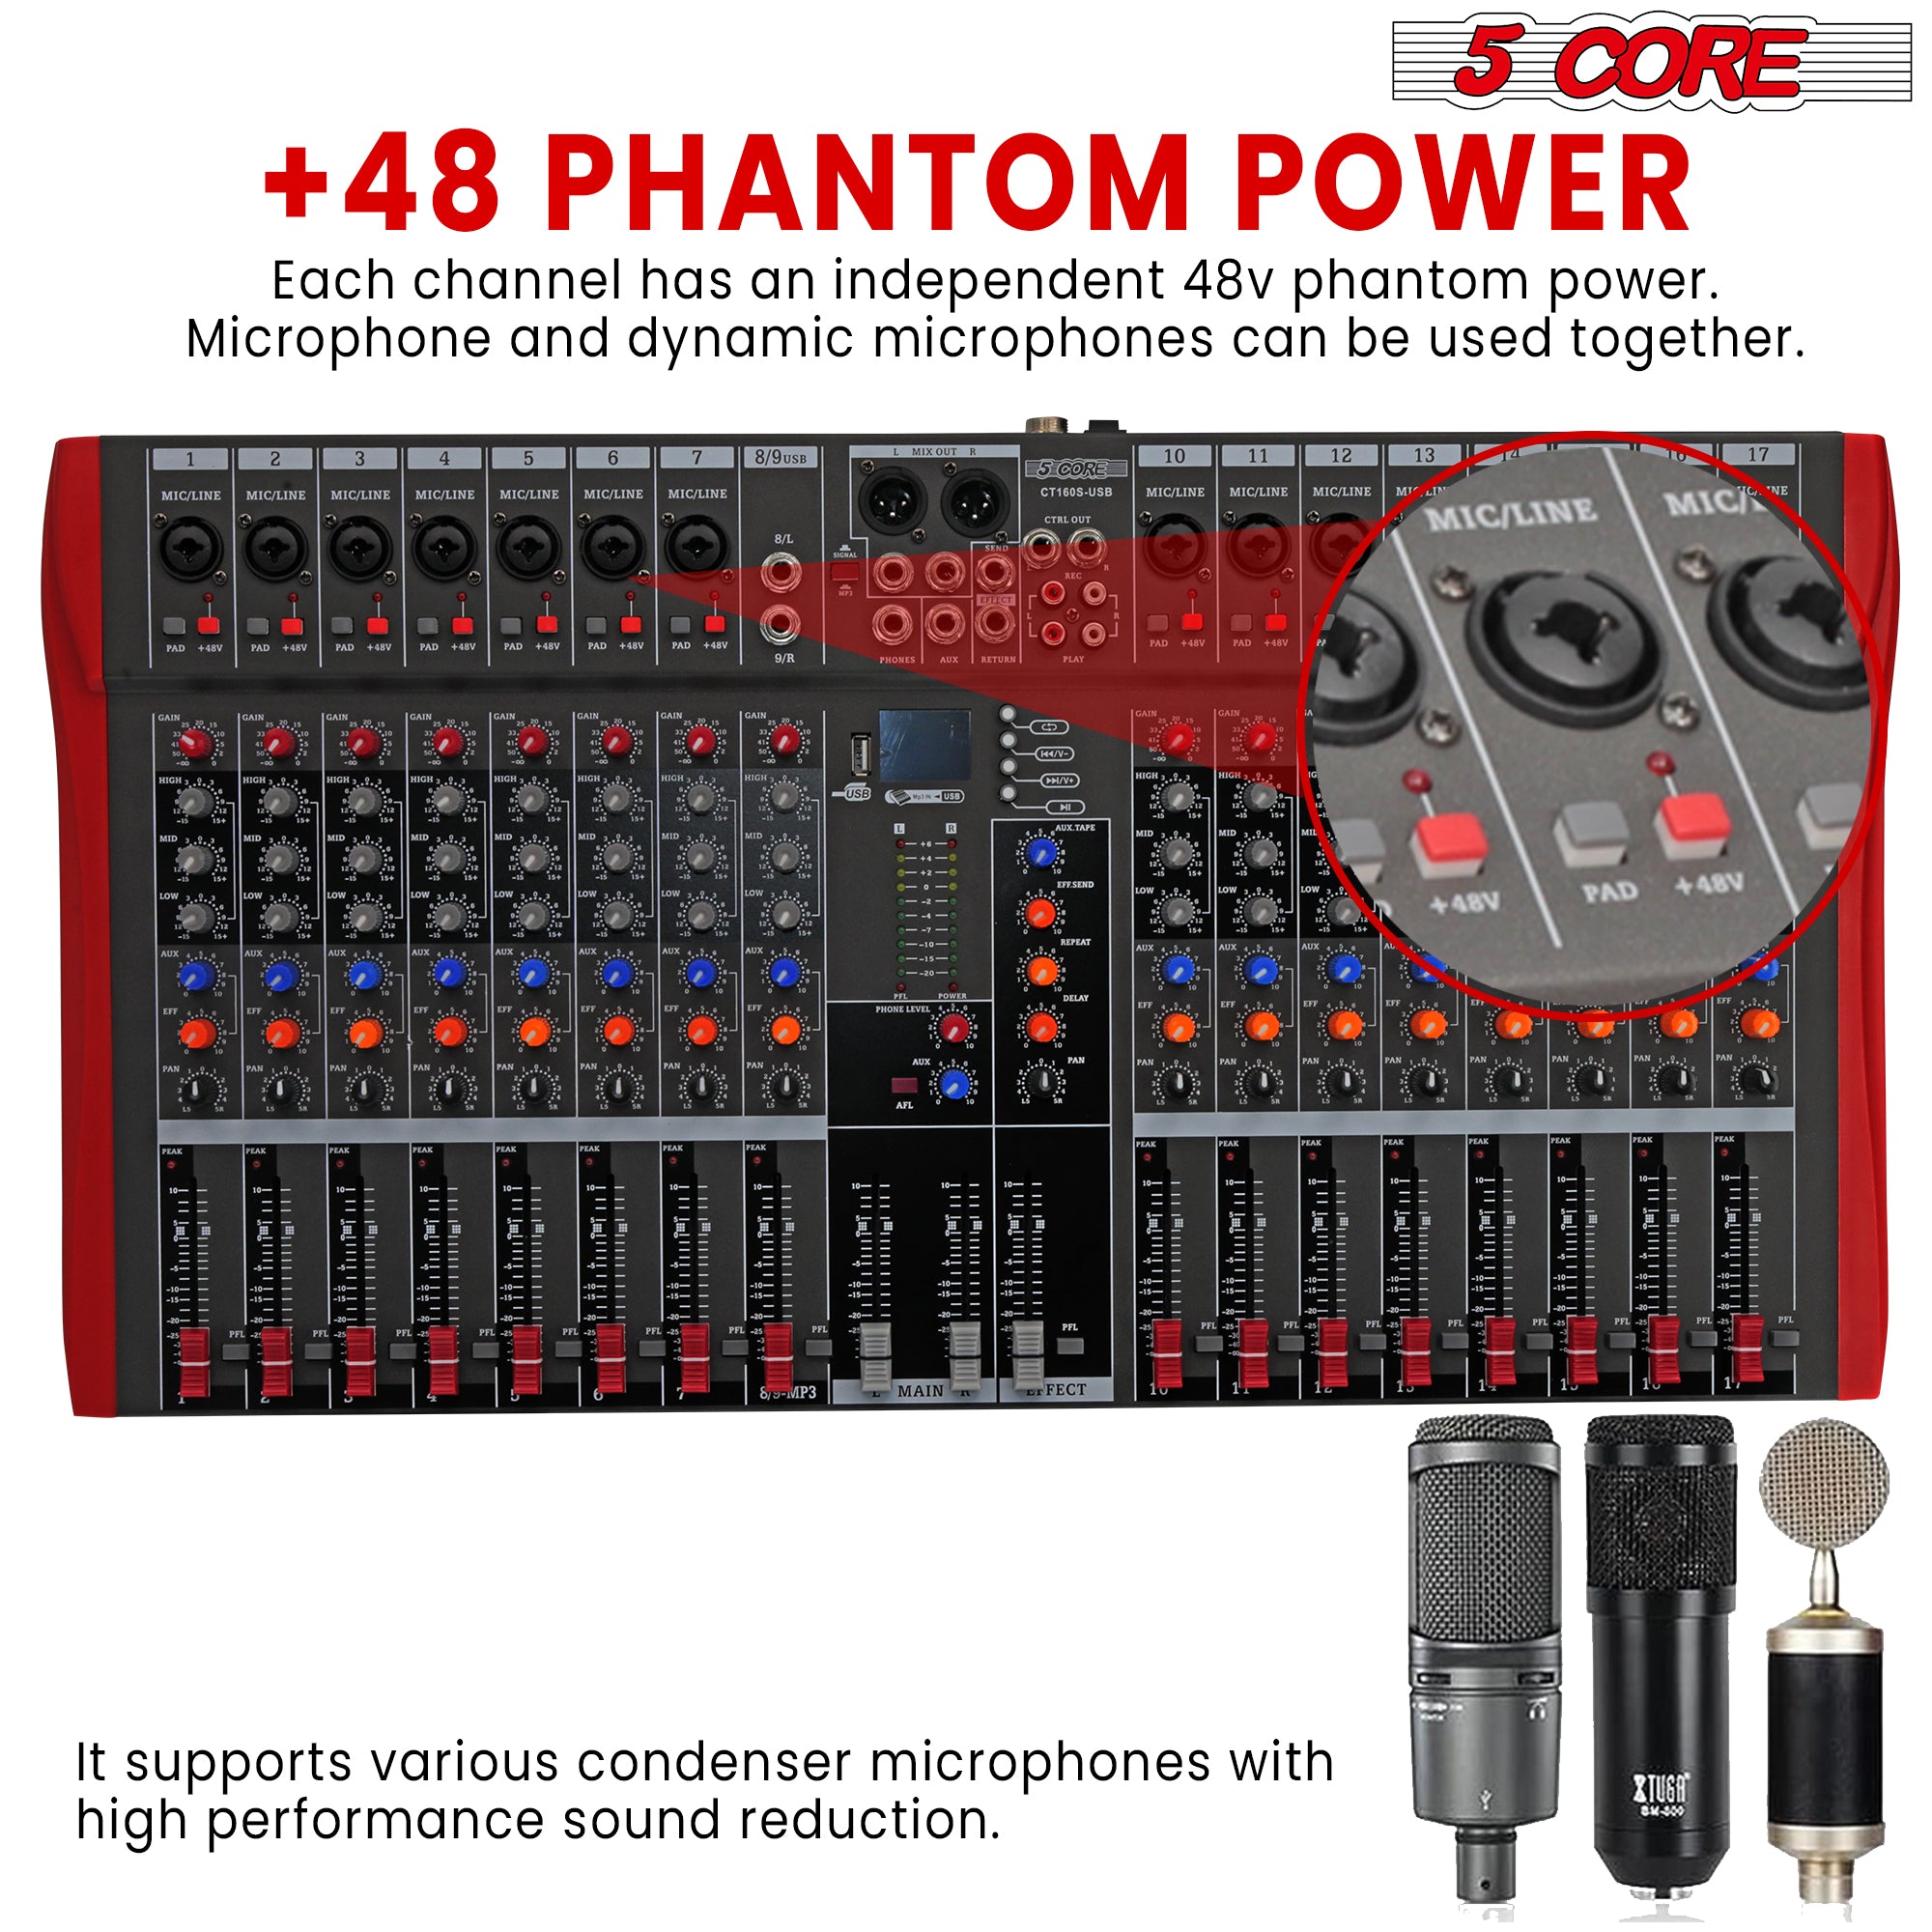 Each channel has an independent +48v phantom power.